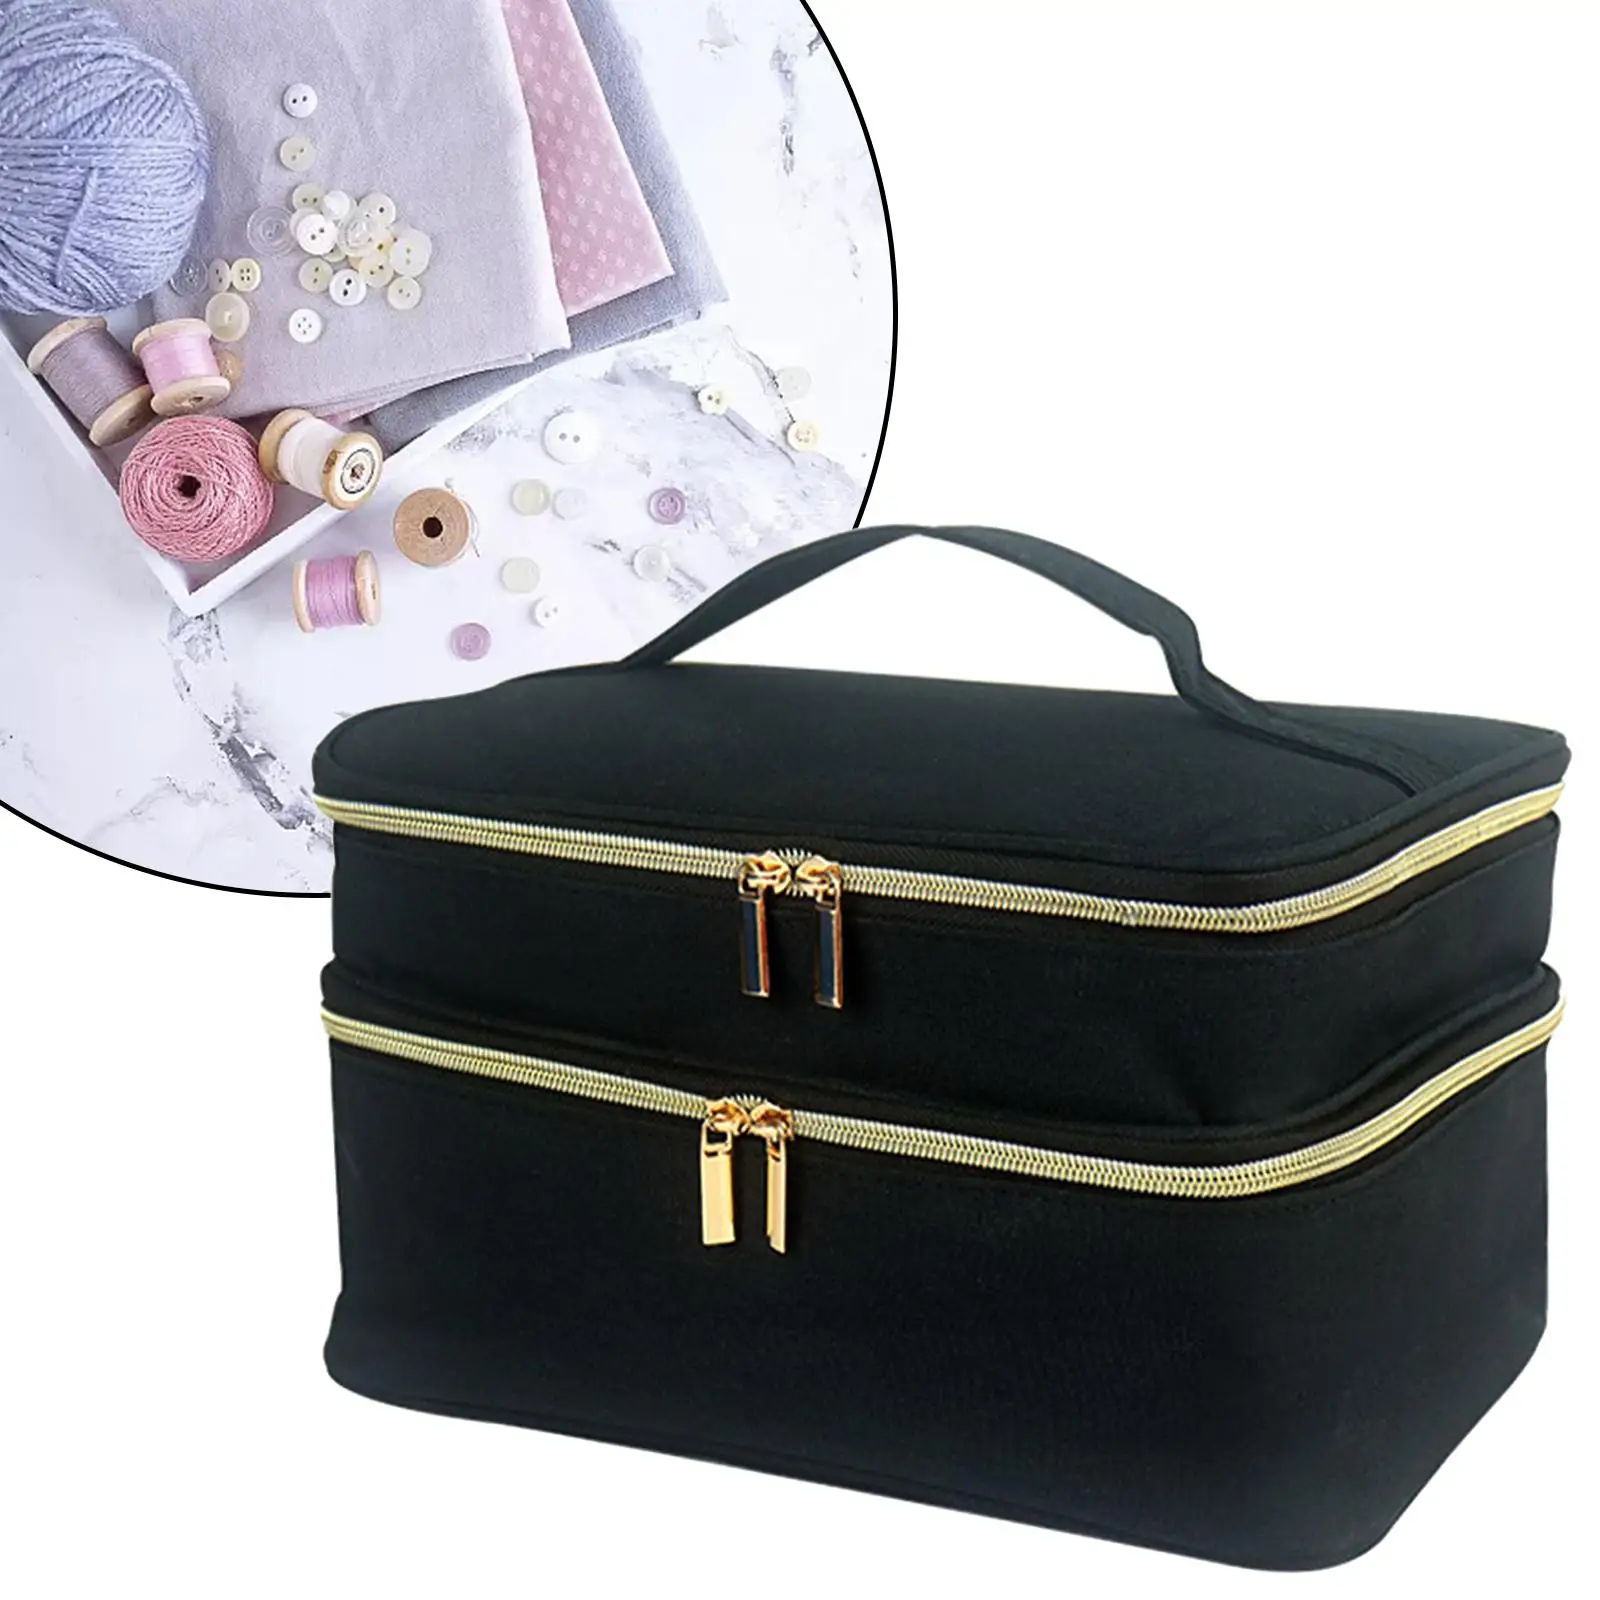 Sewing Accessories Storage Box Supplies Durable for Travel Scissors